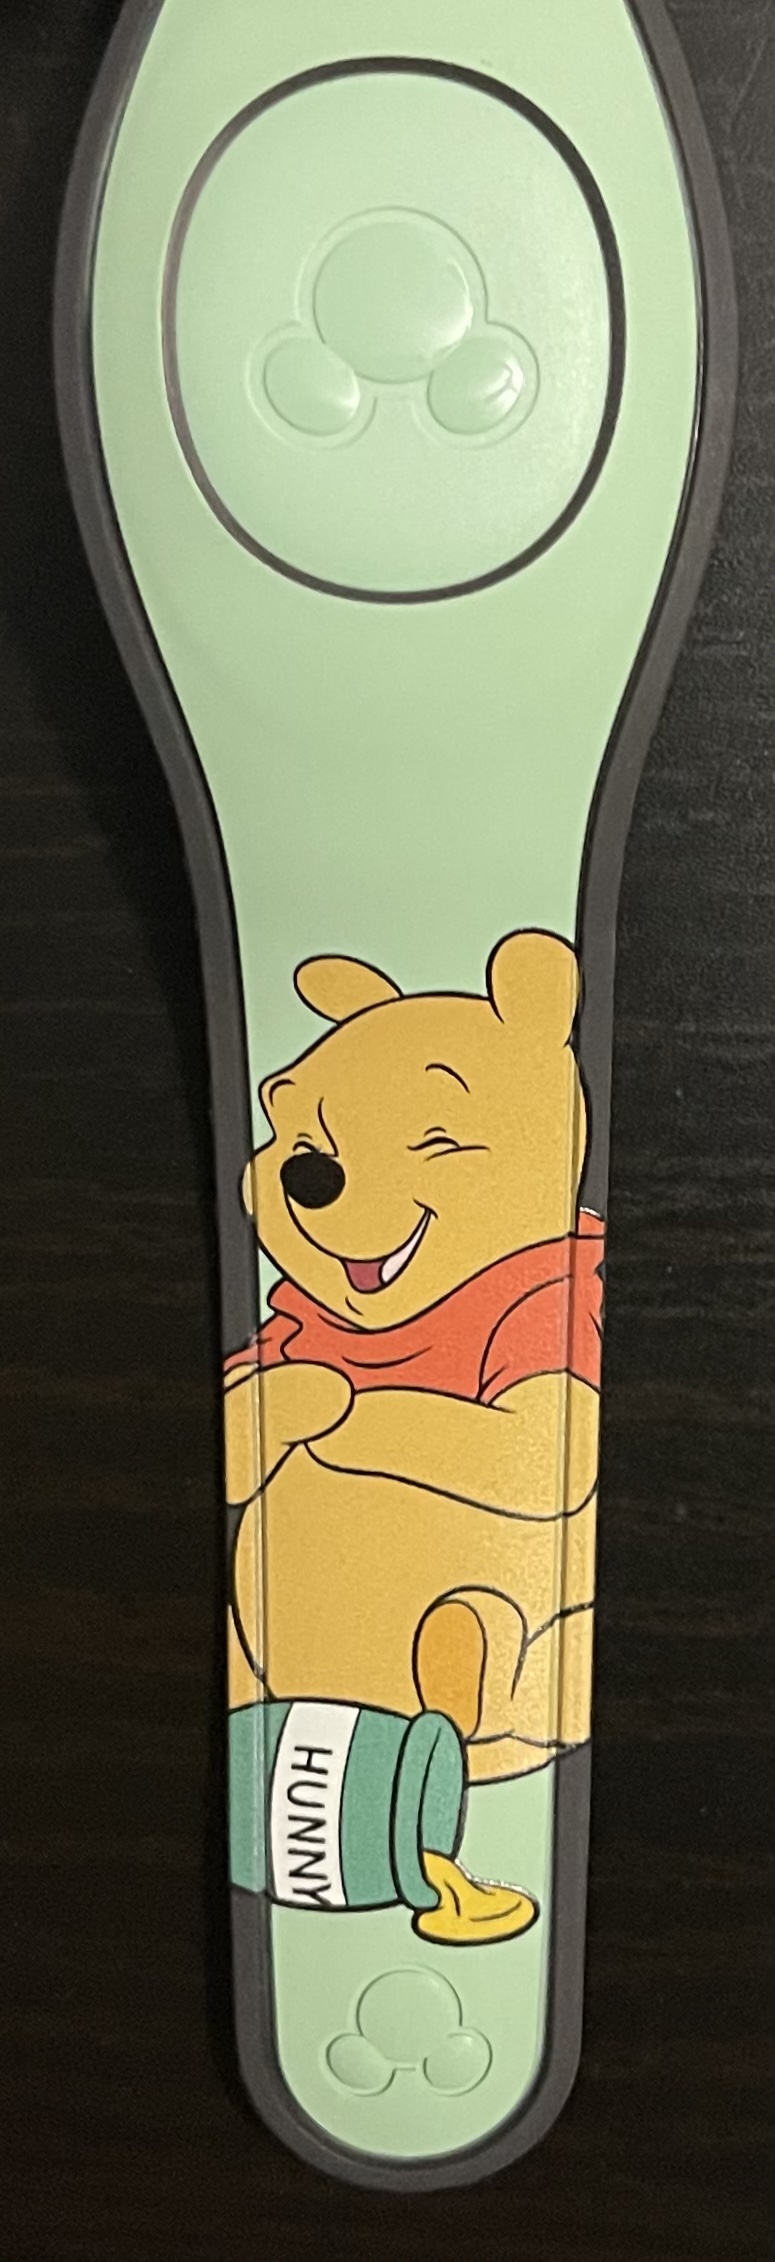 Winnie the Pooh Open Edition MagicBand is now out for purchase